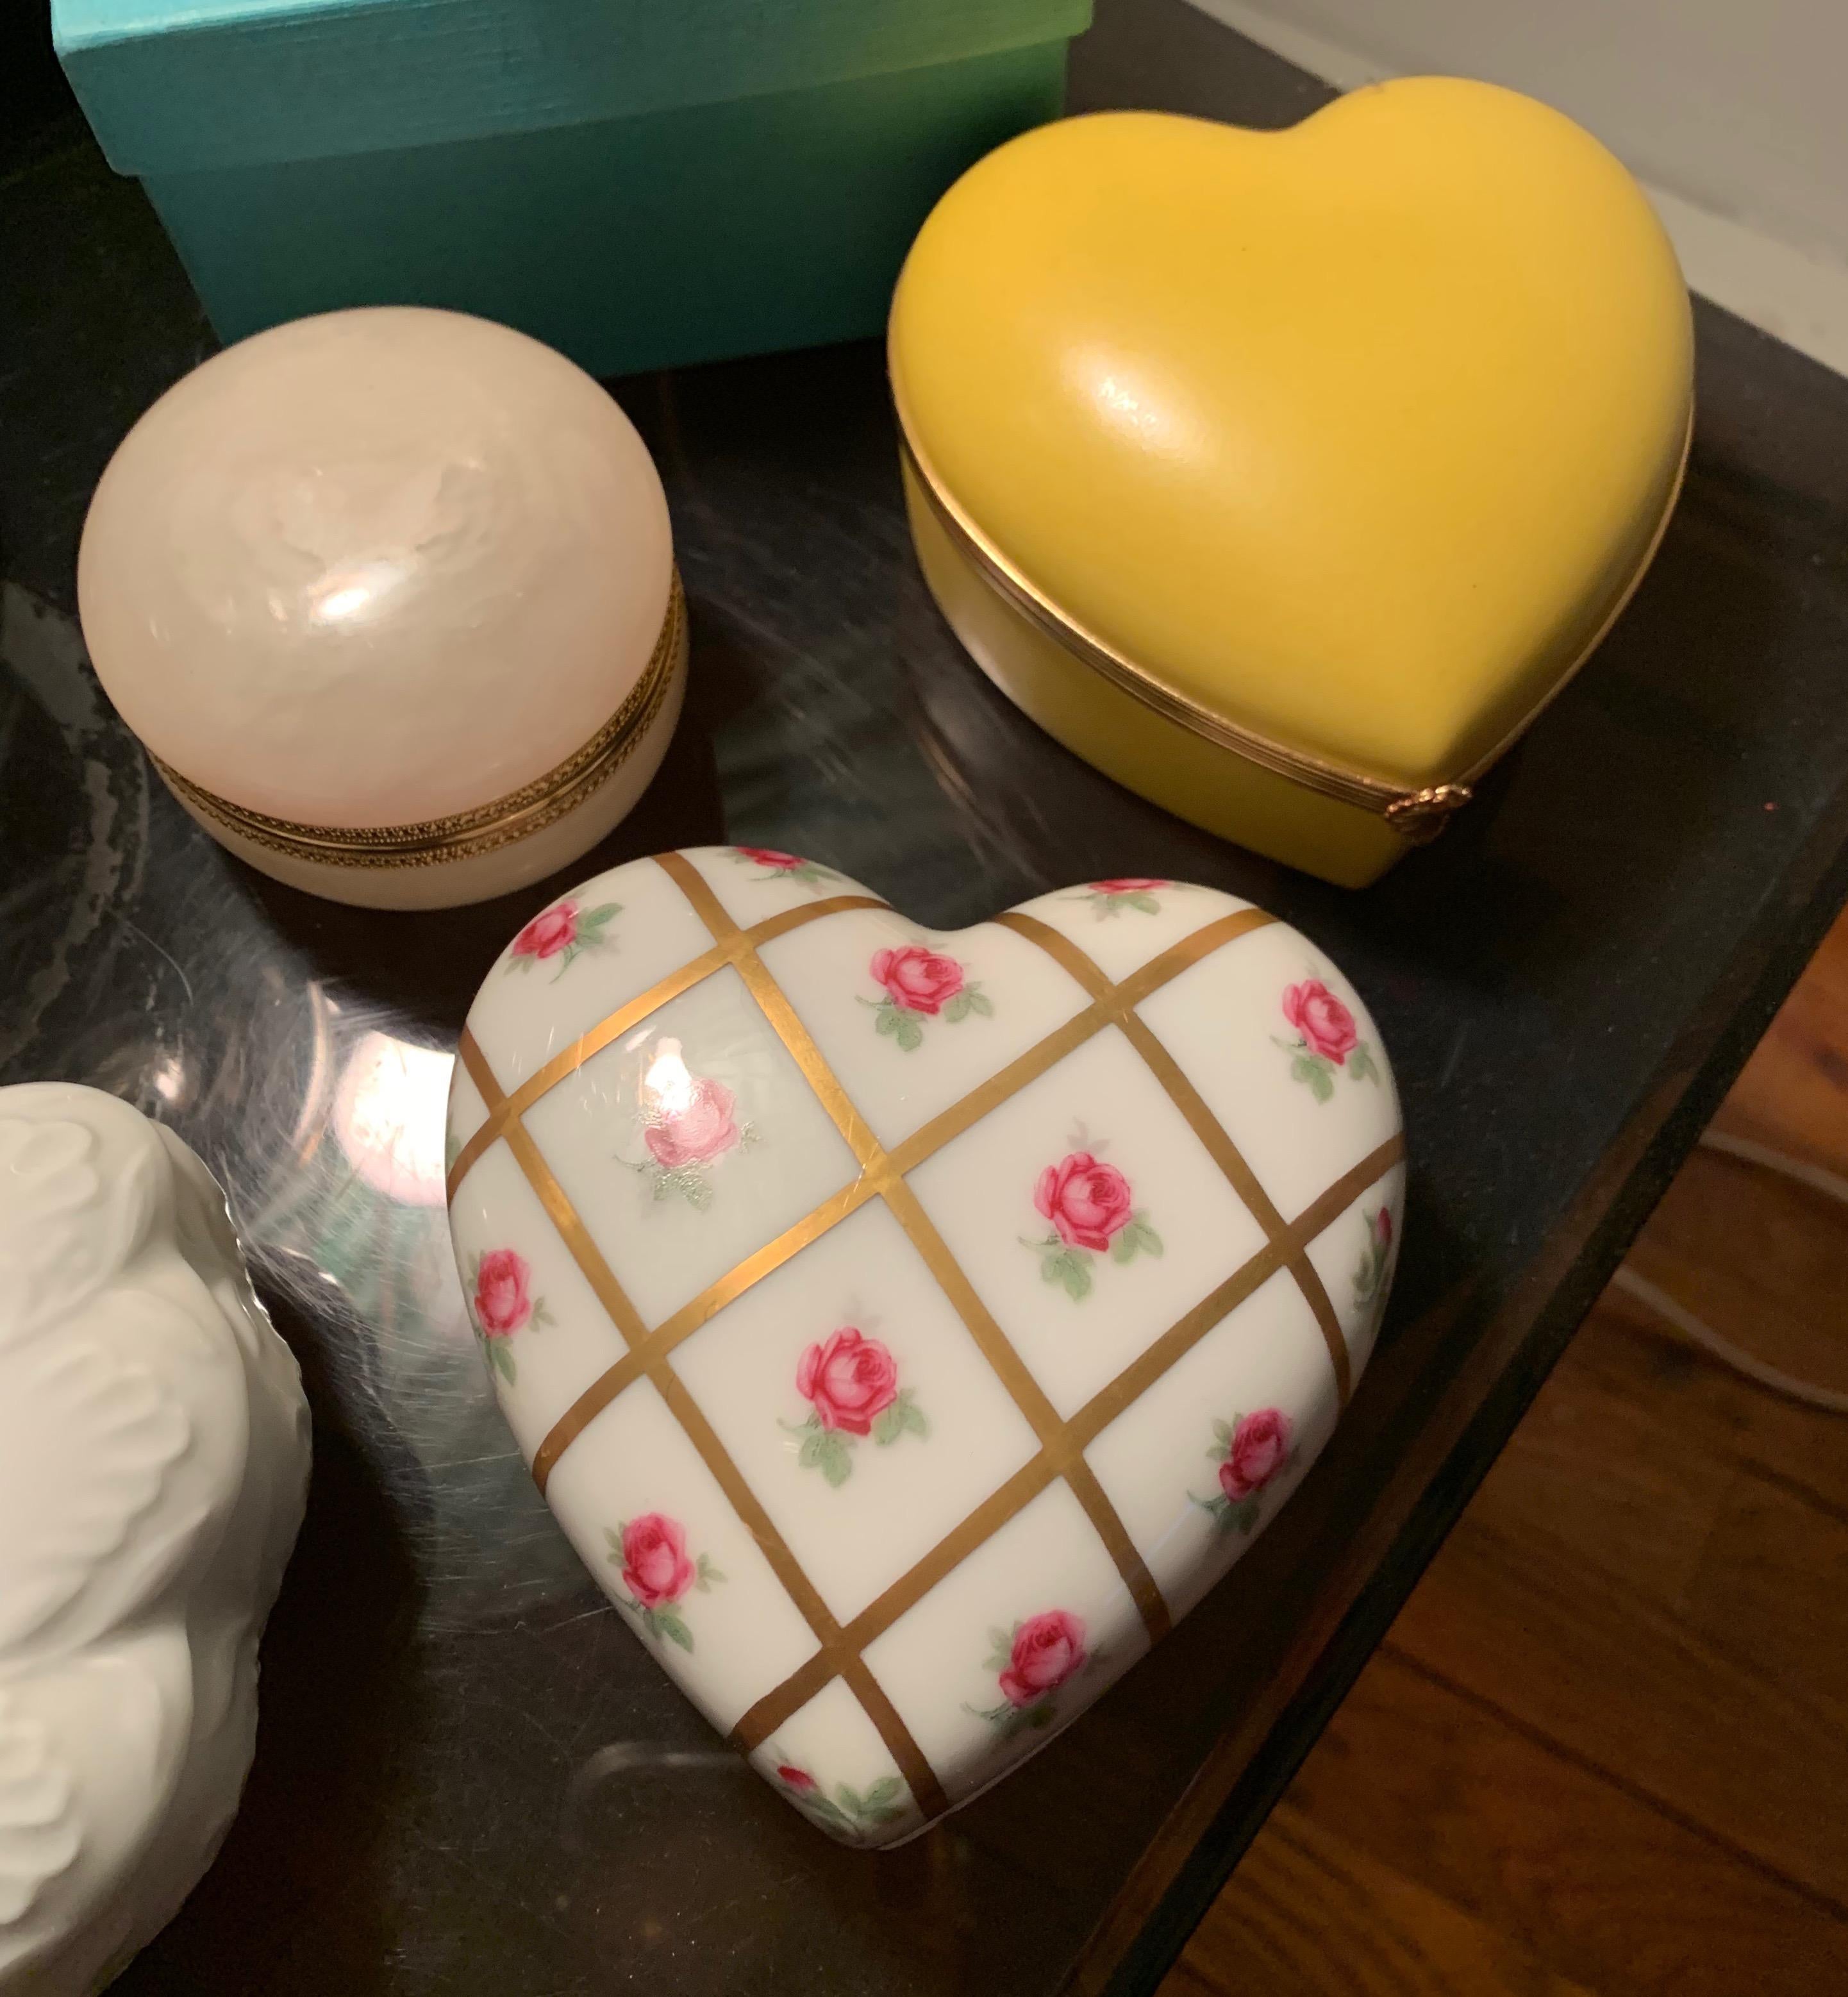 Limoges Porcelain Heart Trinket Box, Canary Yellow, French Porcelain Jewelry Box 5